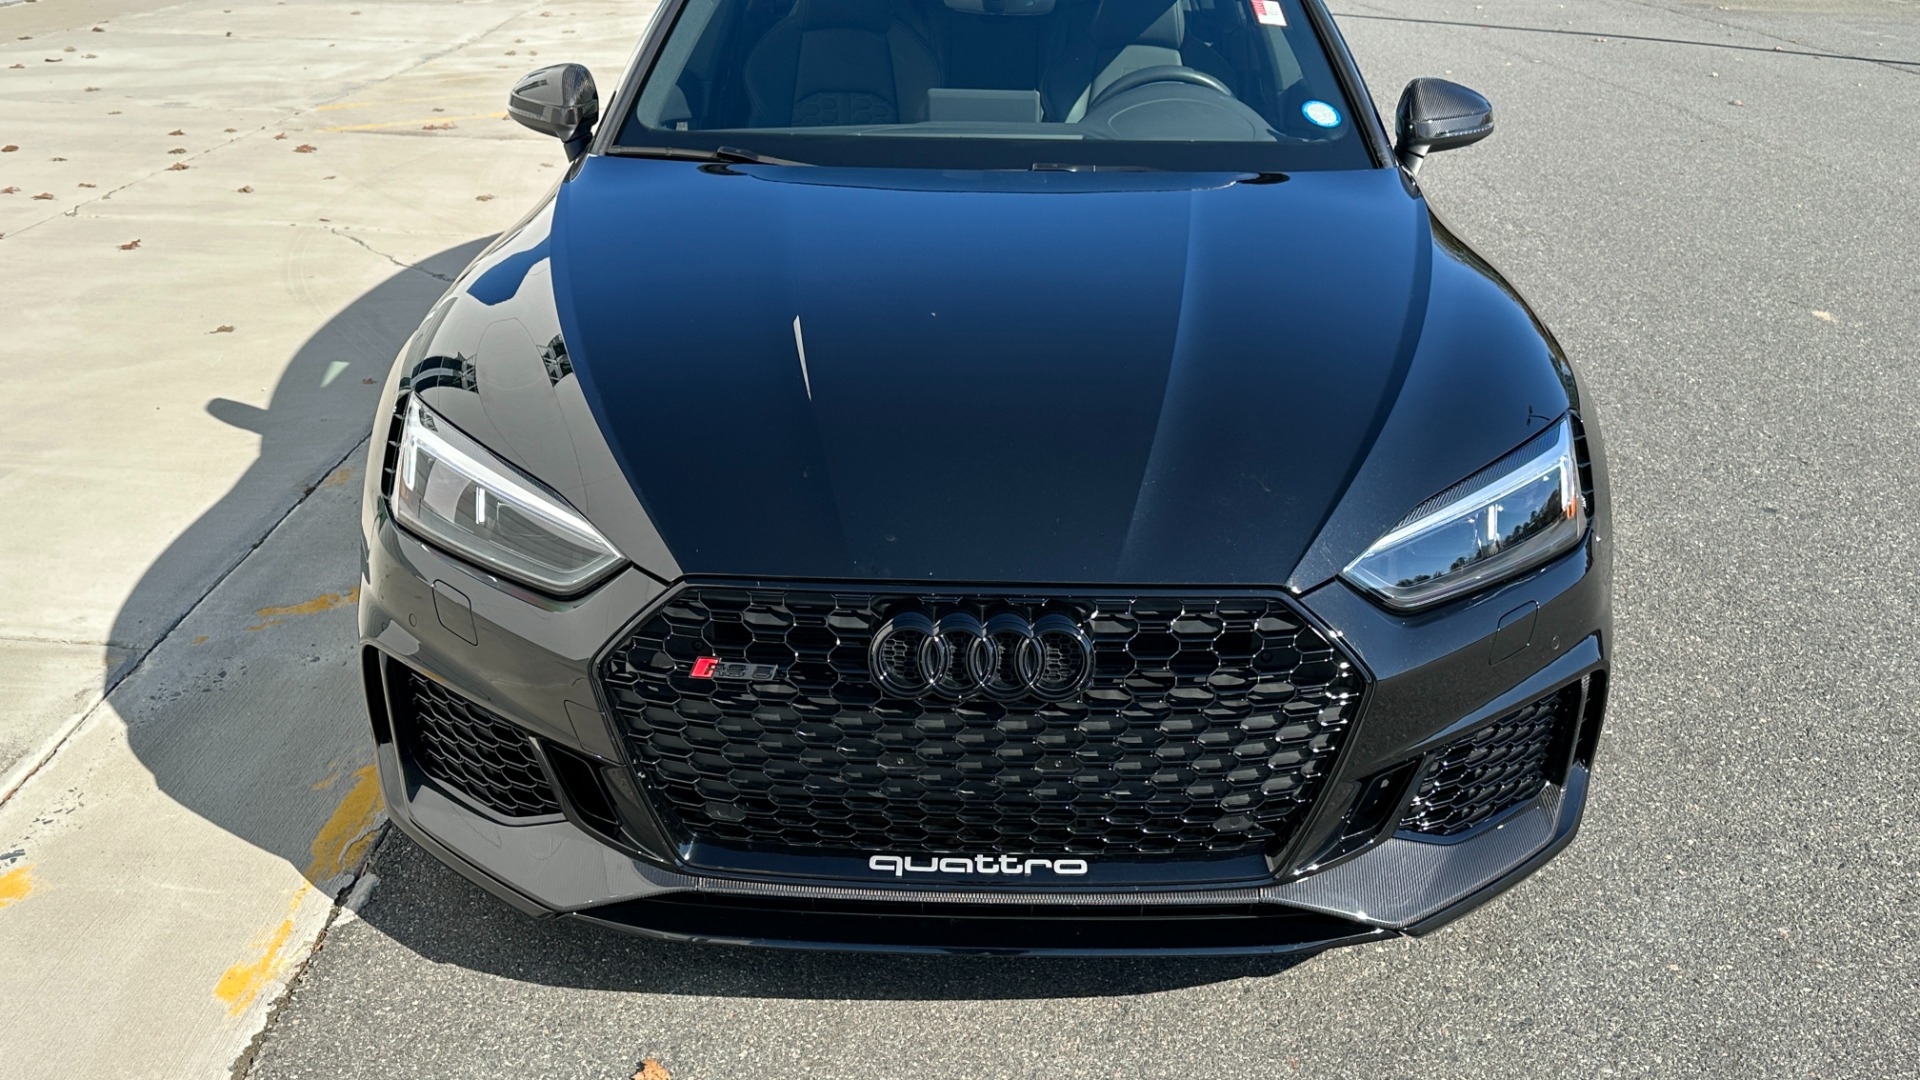 Used 2019 Audi RS 5 Sportback 2.9T QUATTRO / BLACK OPTIC / CARBON FIBER / NAPPA LEATHER / DYNAMIC PLUS for sale $71,999 at Formula Imports in Charlotte NC 28227 8